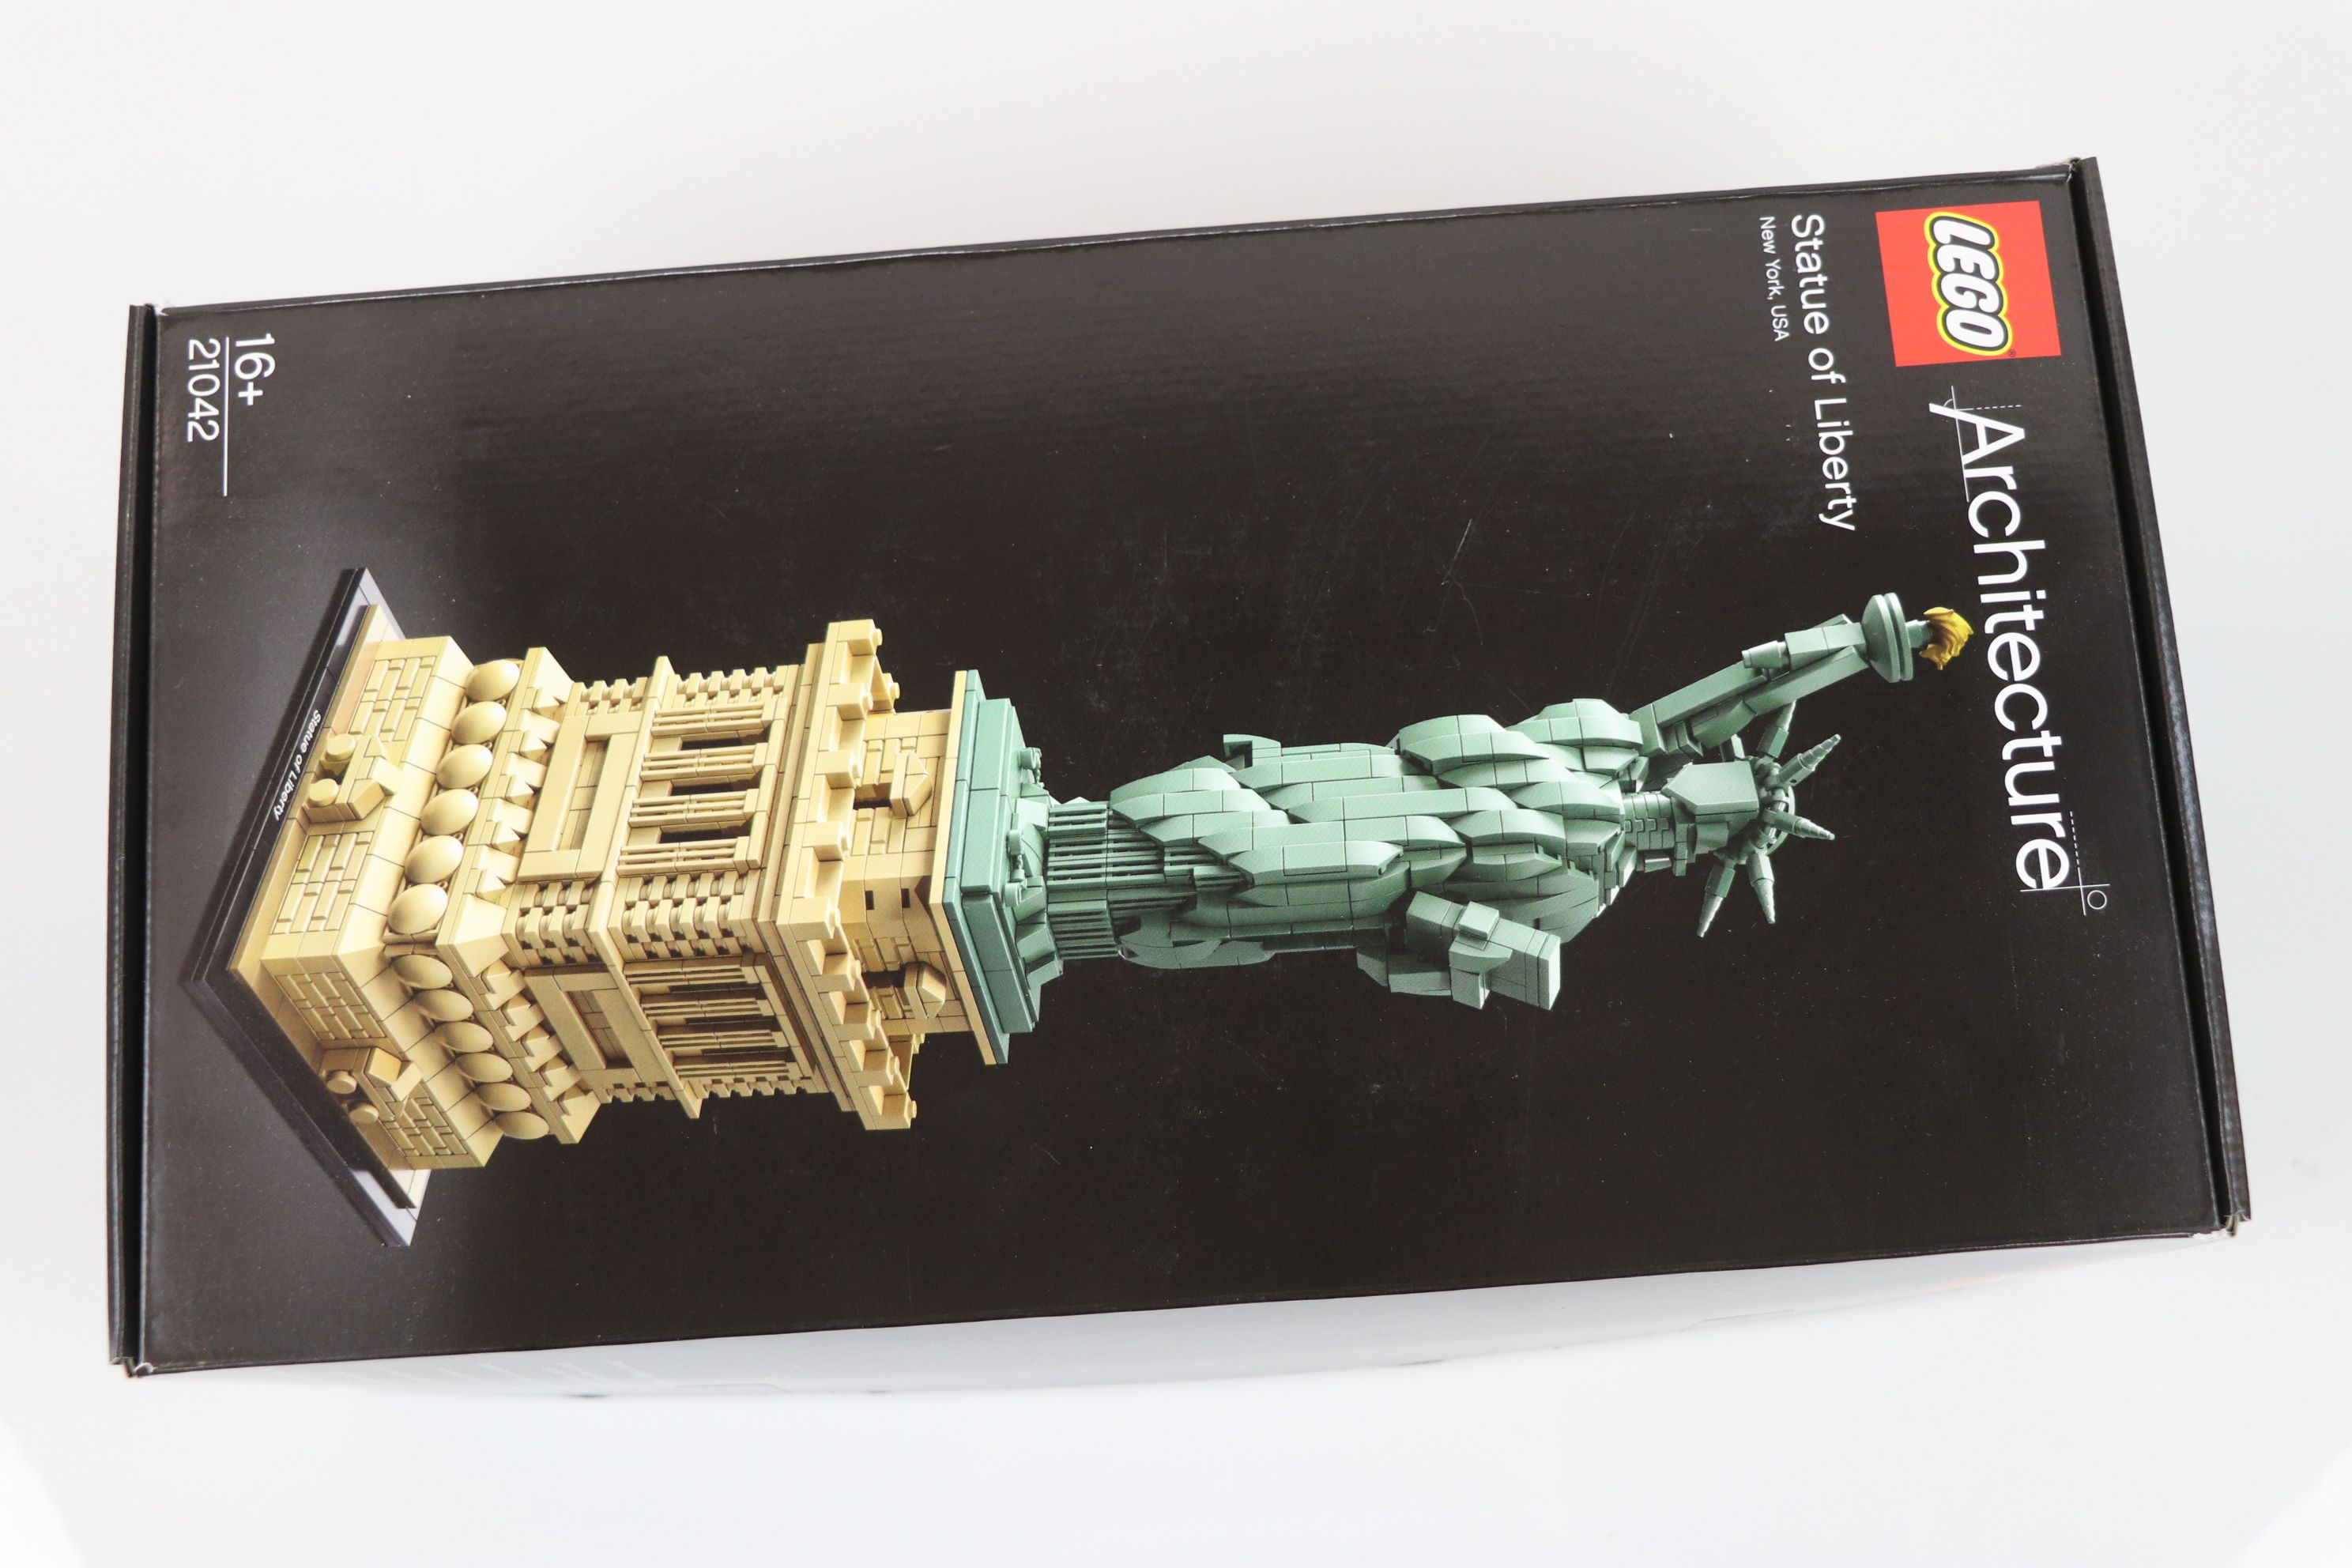 Lego - Two boxed Lego Architecture sets to include 21042 Statue of Liberty and 21034 London, both - Image 4 of 14